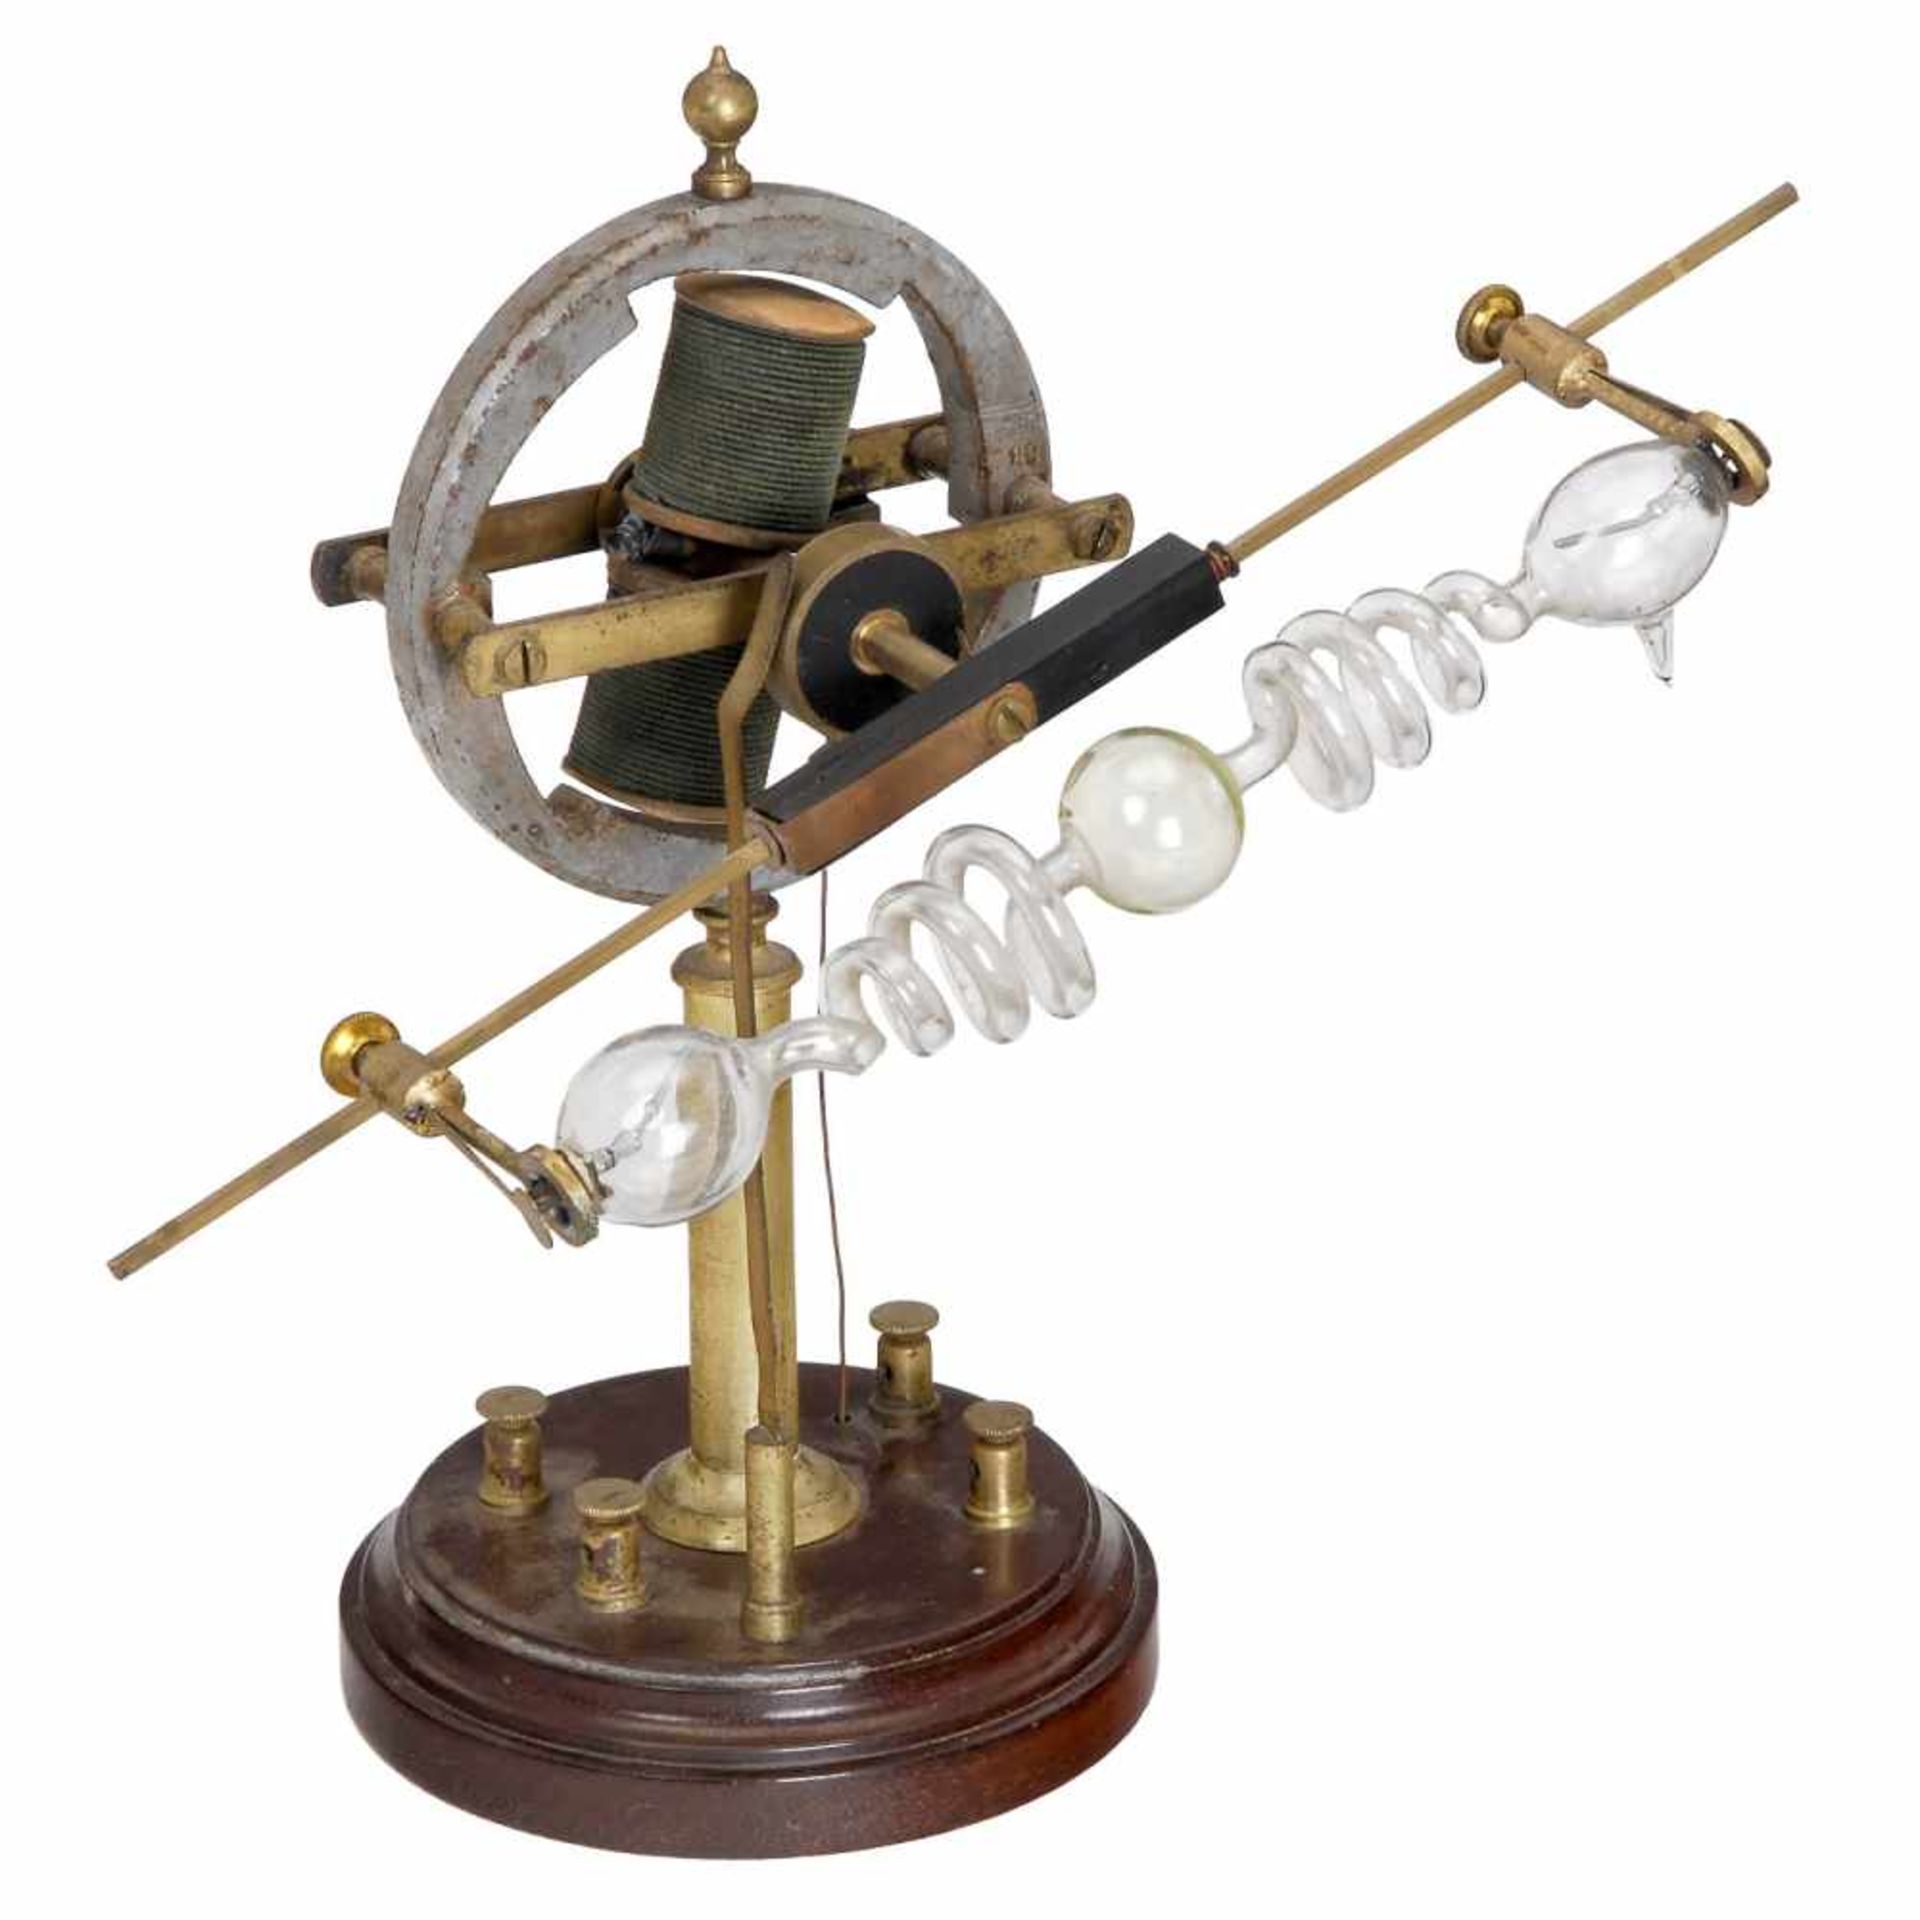 Electro-Magnetic Motor with Rotating Geissler Tube, c. 1890Physical demonstration model, two